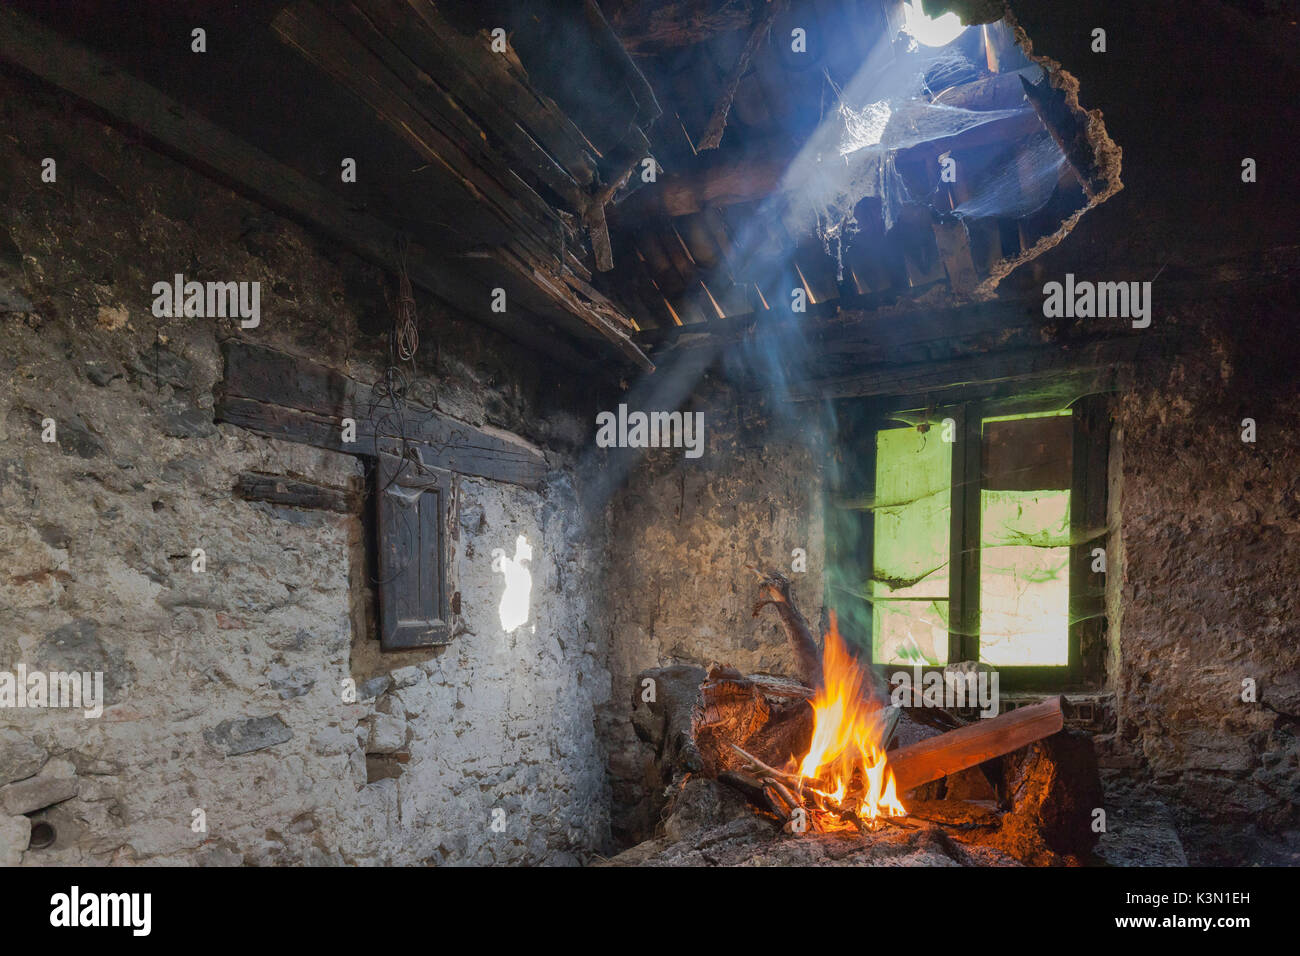 Sedico, Belluno, Veneto, Italy. Fire in the ancient fireplace in one of the many abandoned buildings in the area of Monti del Sole Stock Photo